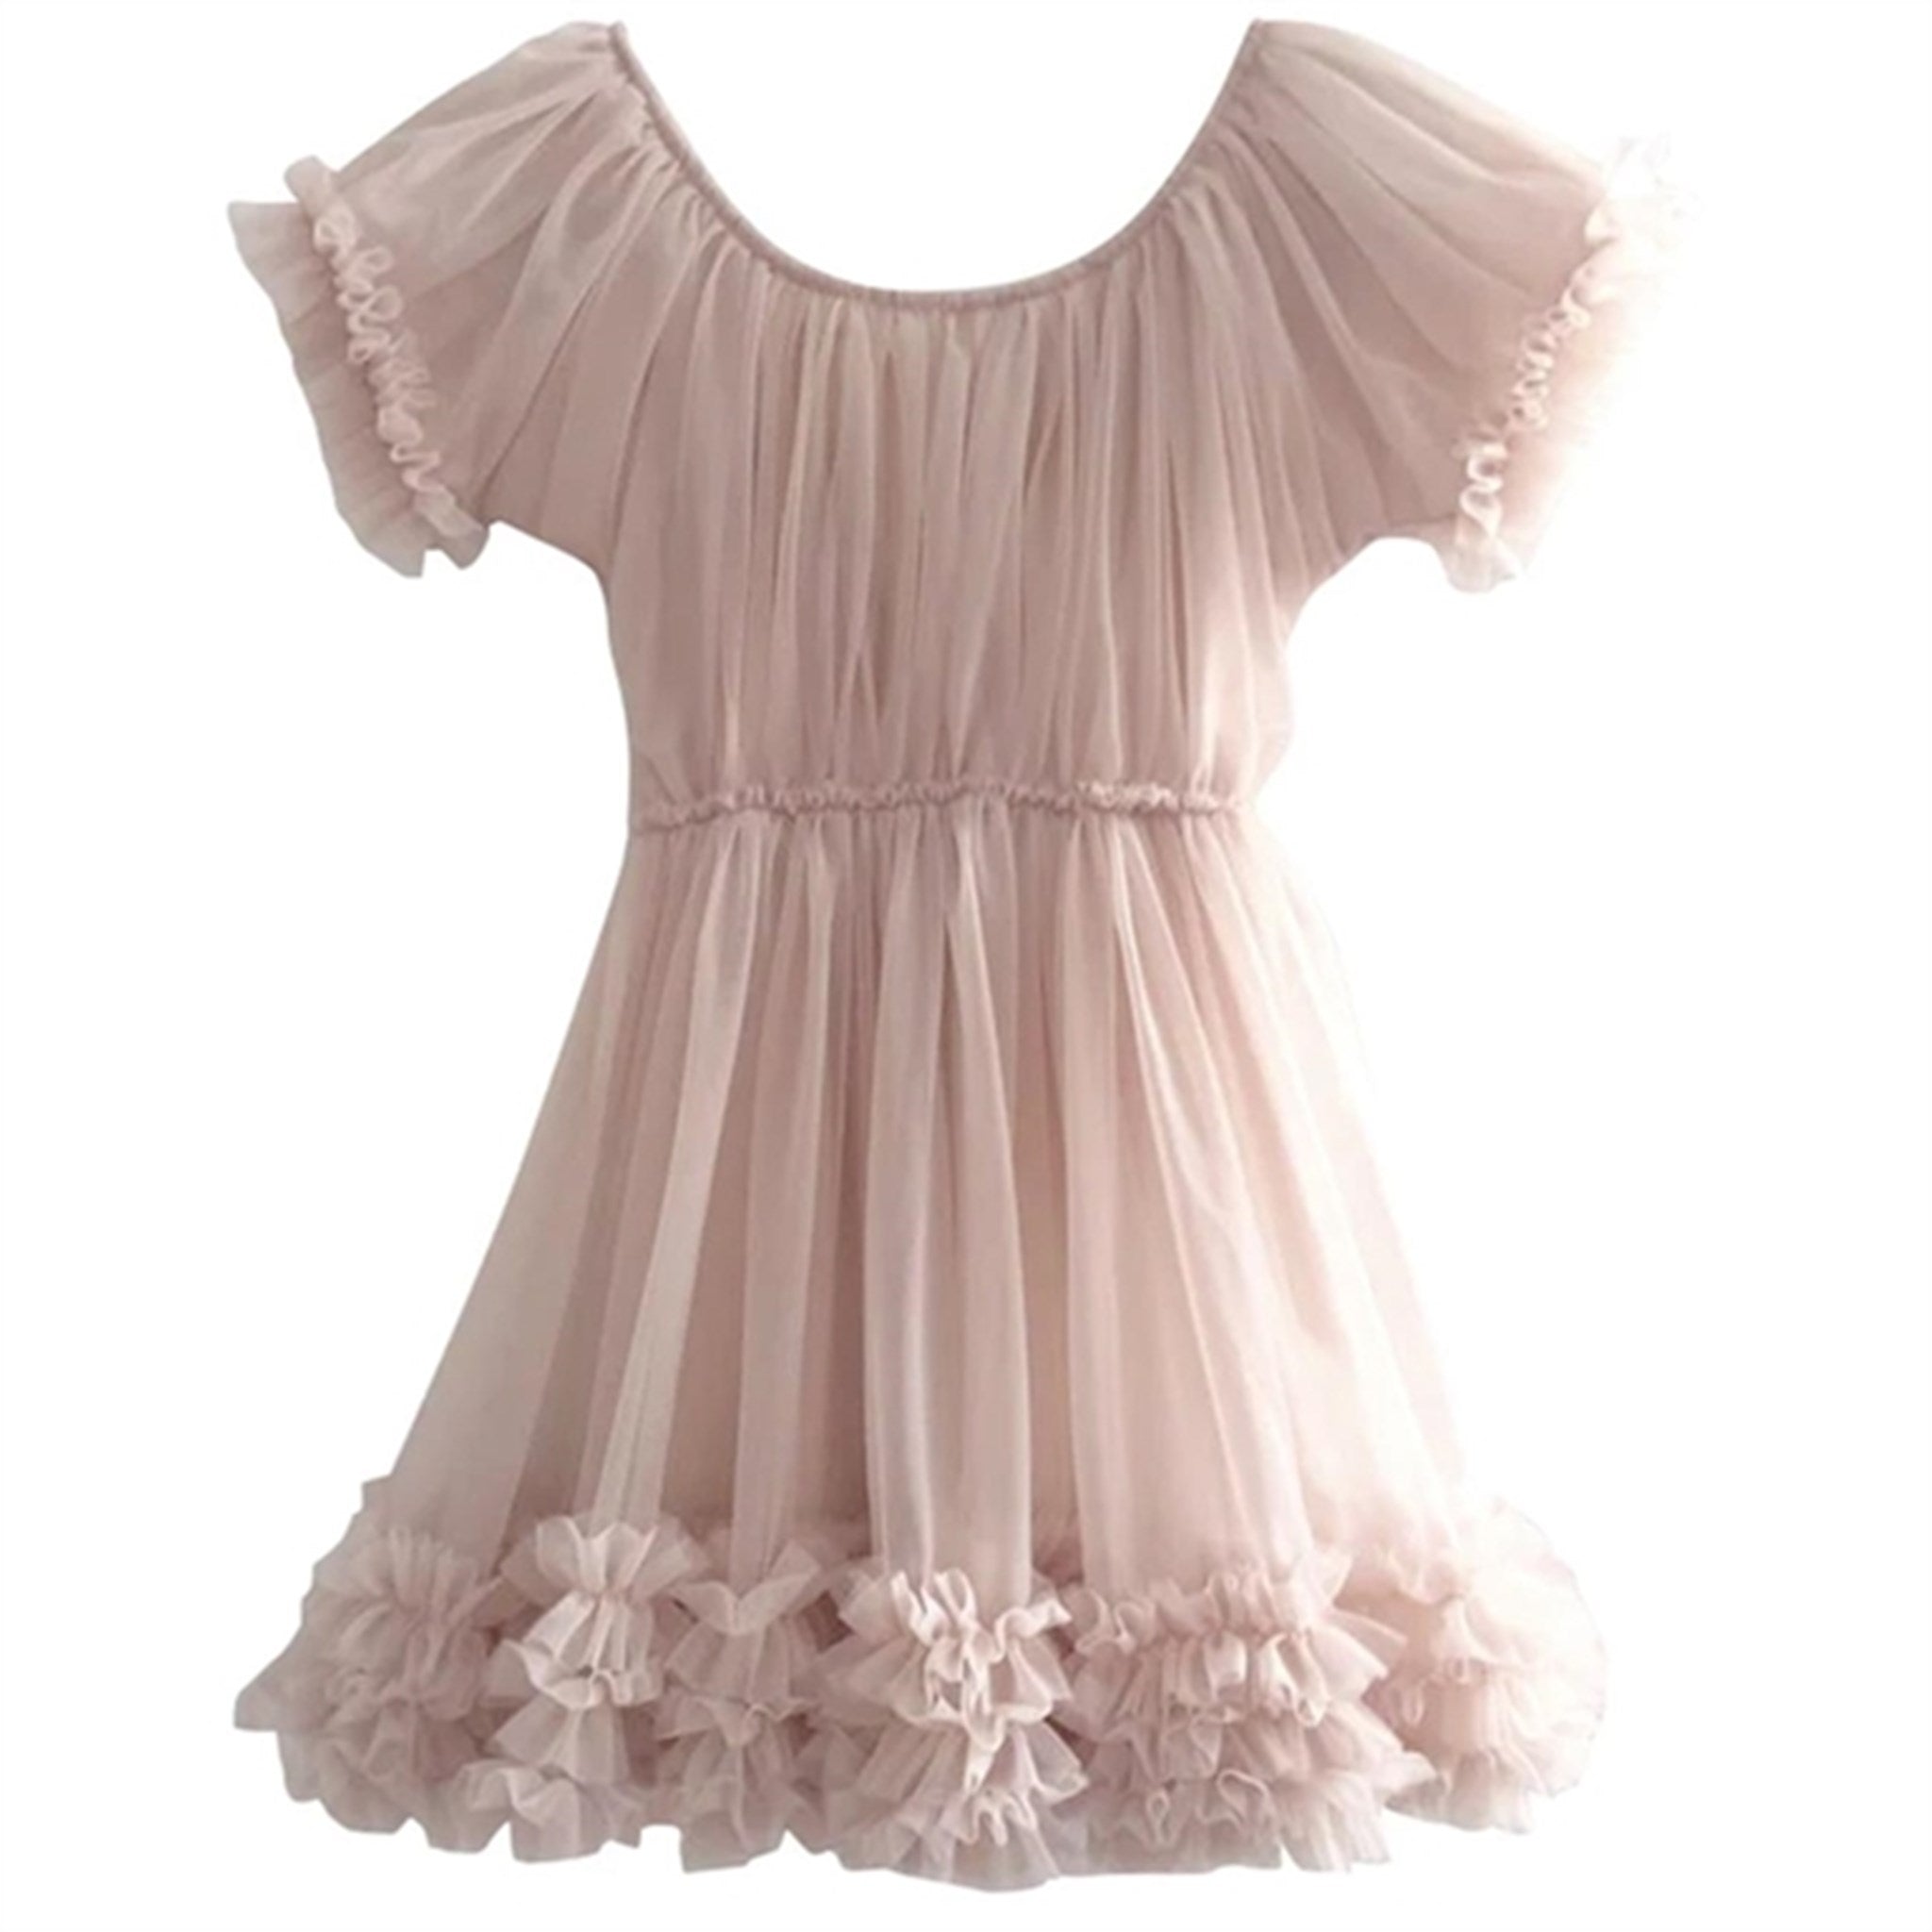 Dolly by Le Petit Frilly Klänning Ballet Pink